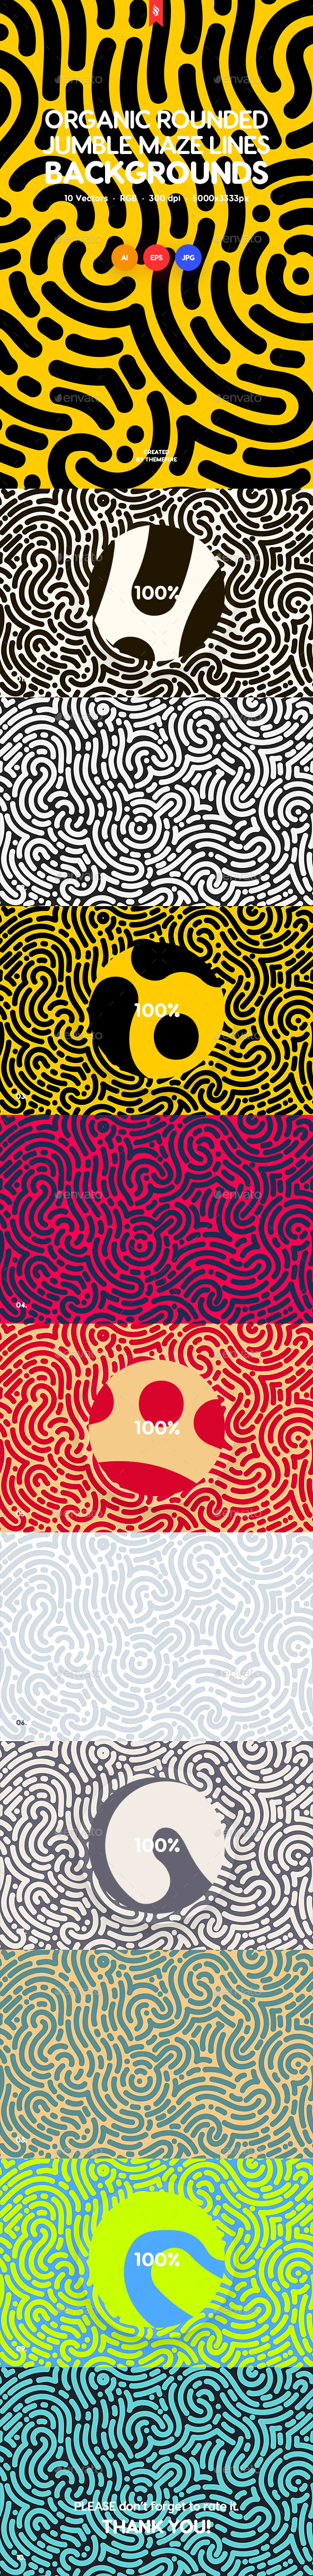 Organic Rounded Jumble Maze Lines Seamless Patterns / Backgrounds